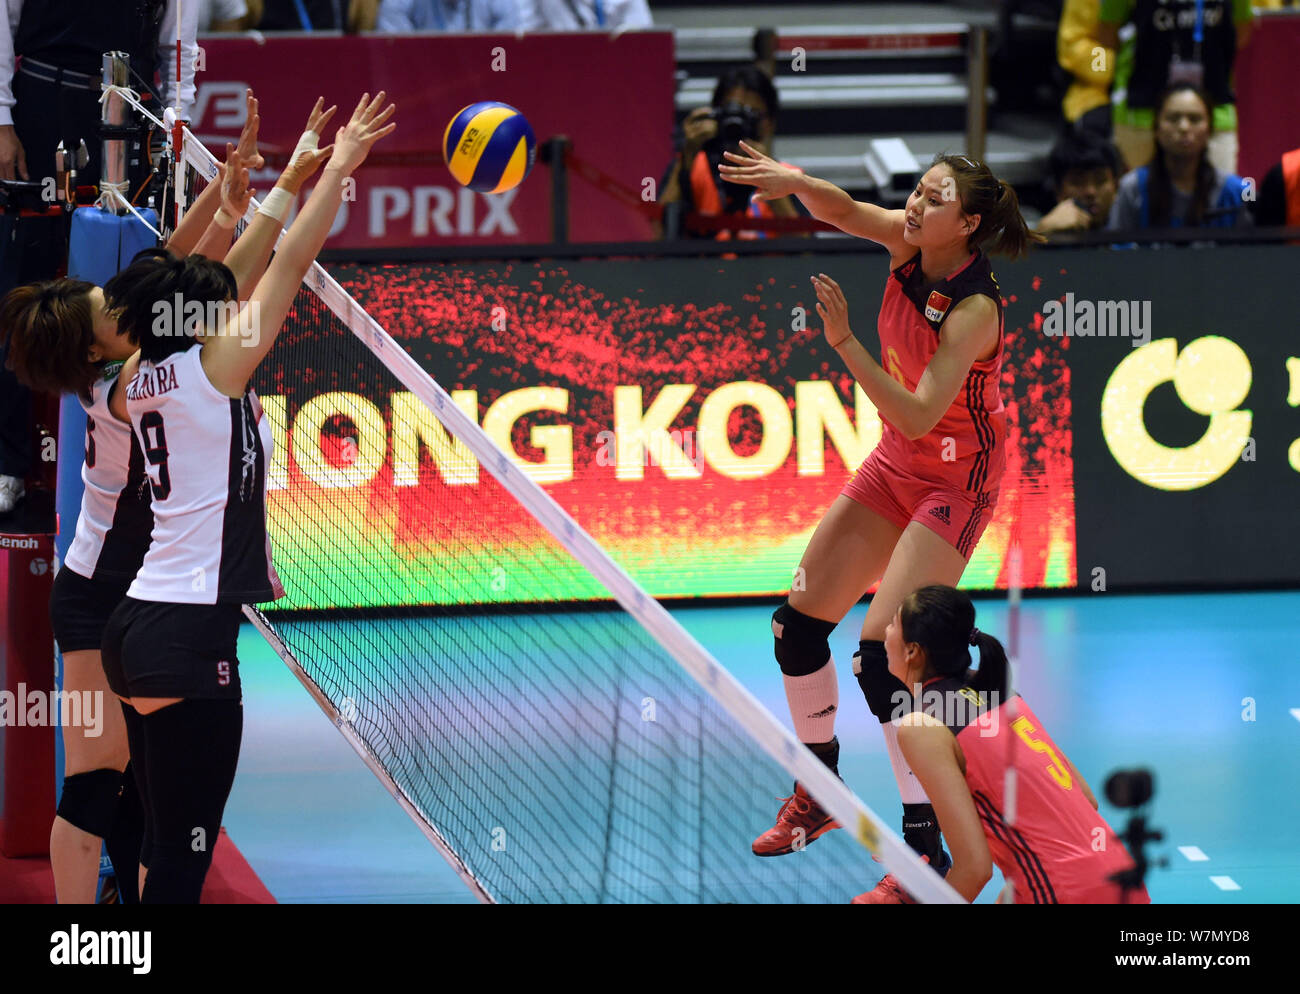 Xiangyu Gong, right, of China spikes against Haruyo Shimamura of Japan during the Pool G1-Group 1 match of the FIVB Volleyball World Grand Prix Hong K Stock Photo